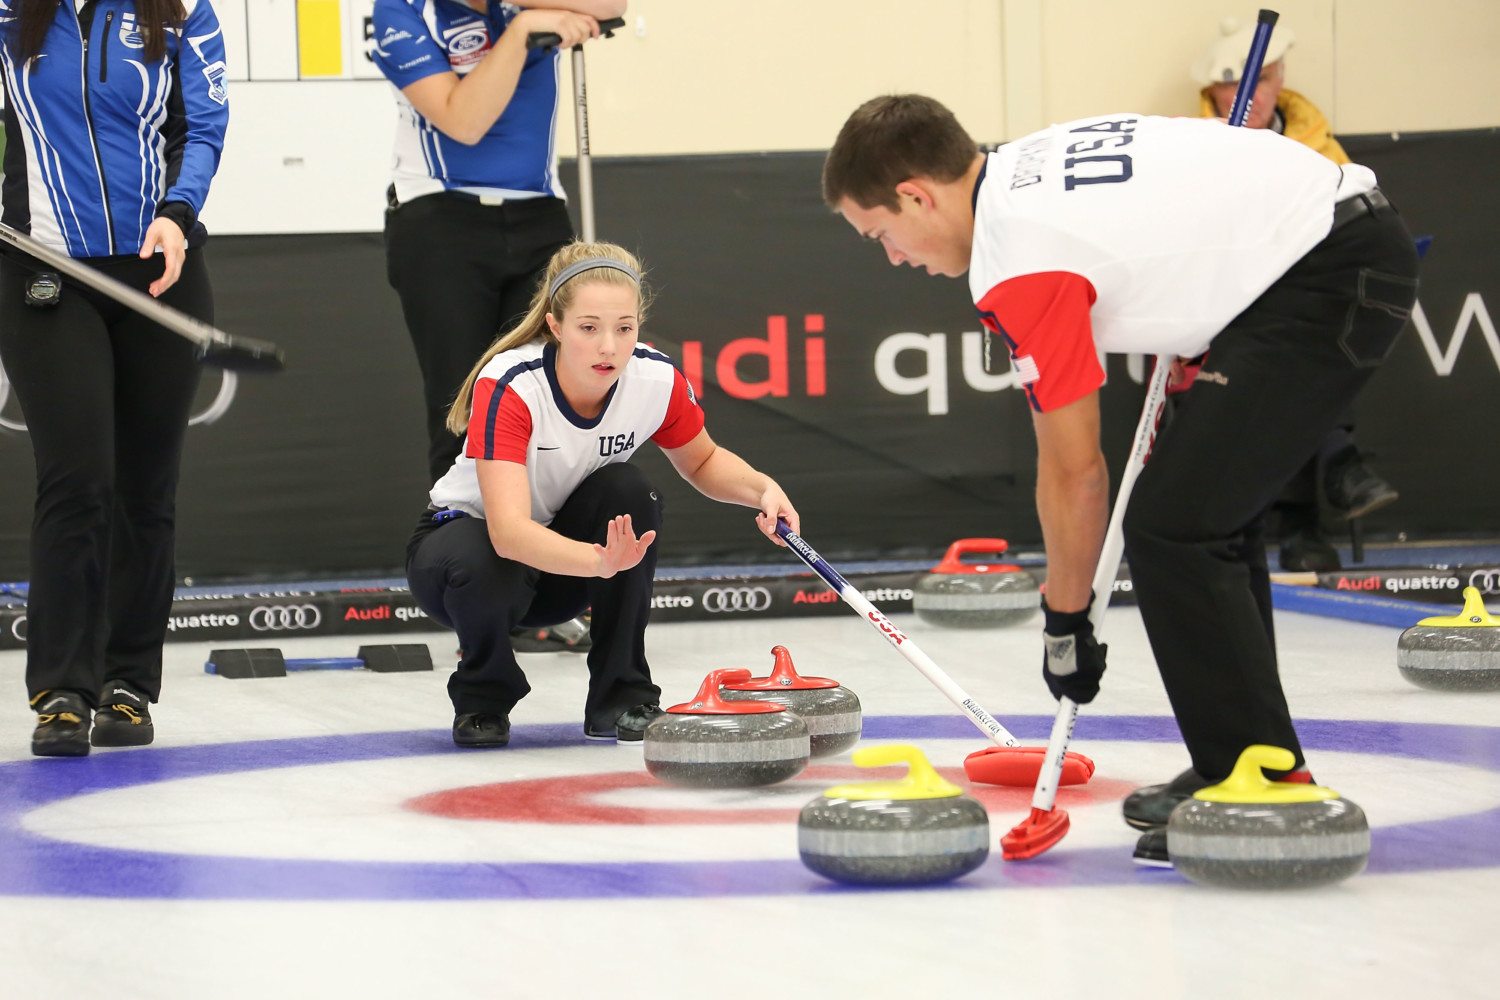 curling mixed doubles photo